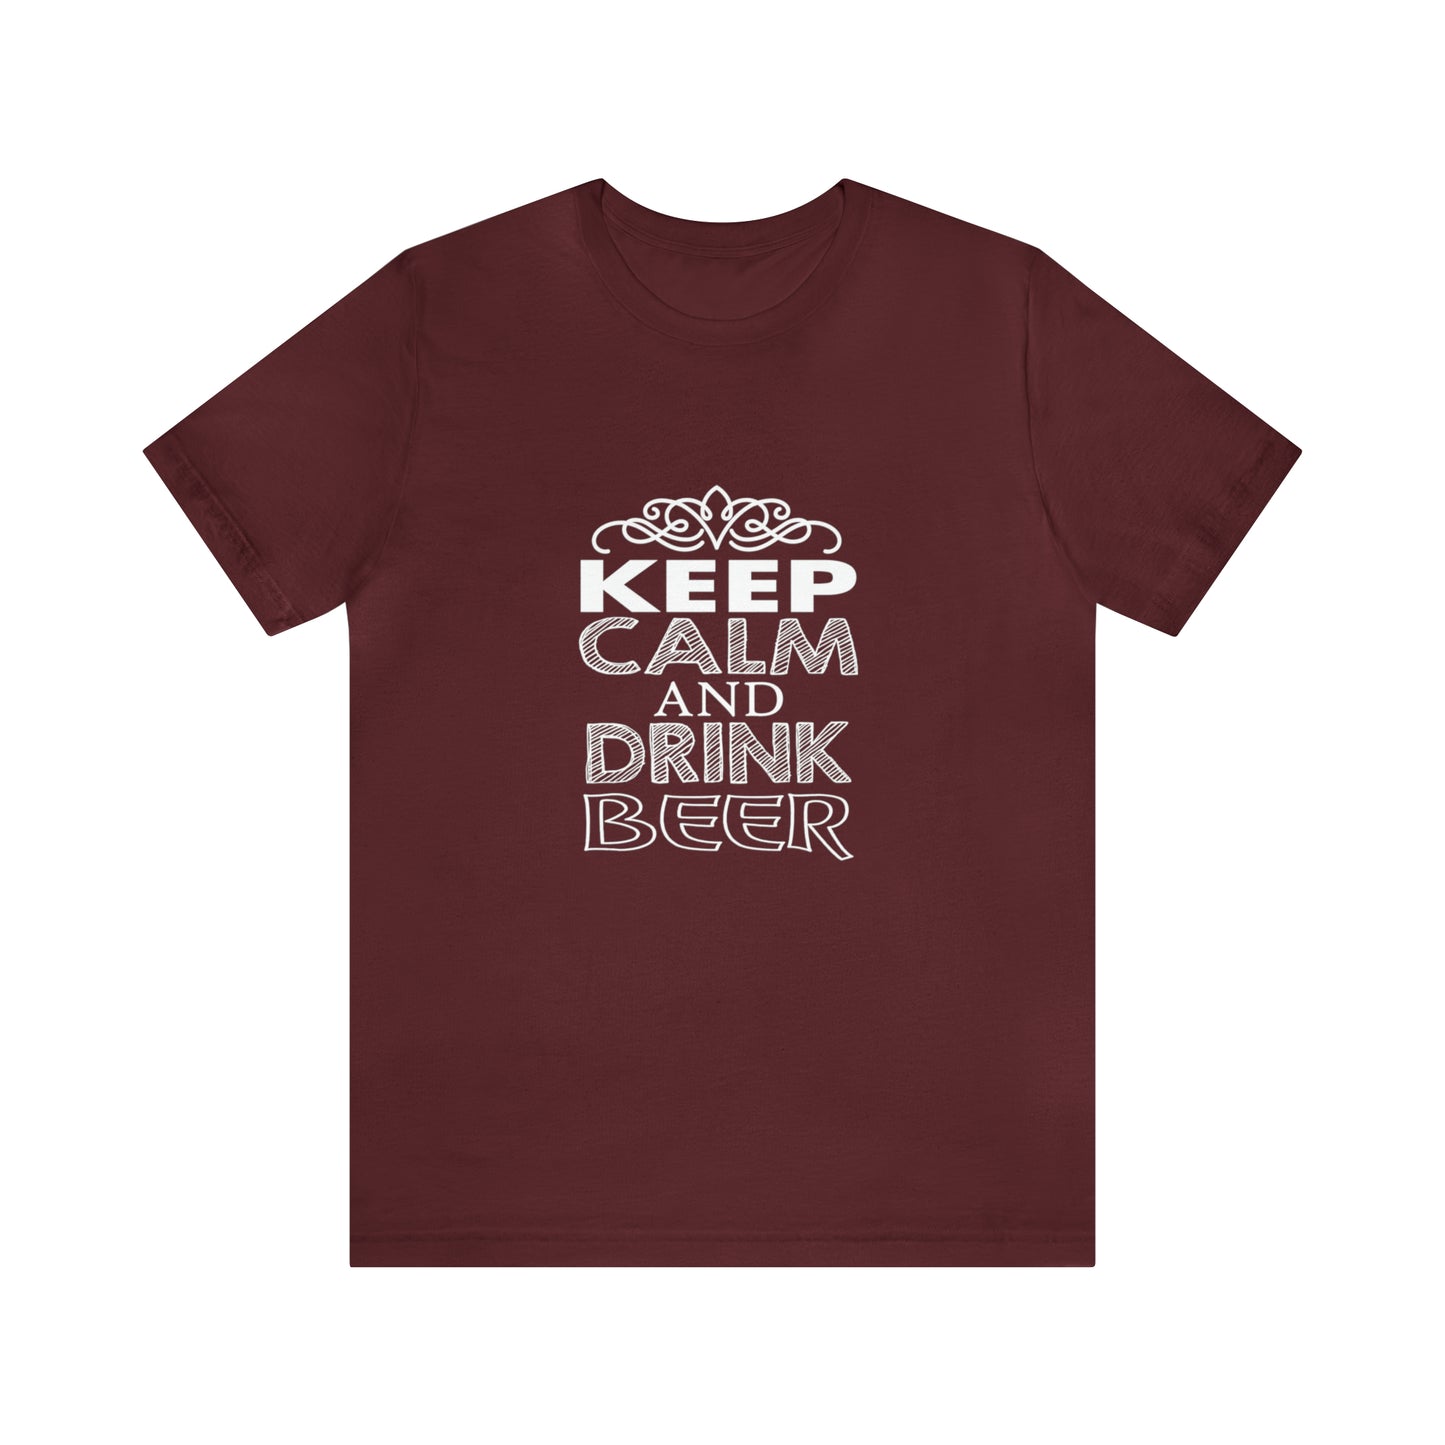 Keep Calm and Drink Beer - Unisex T-Shirt